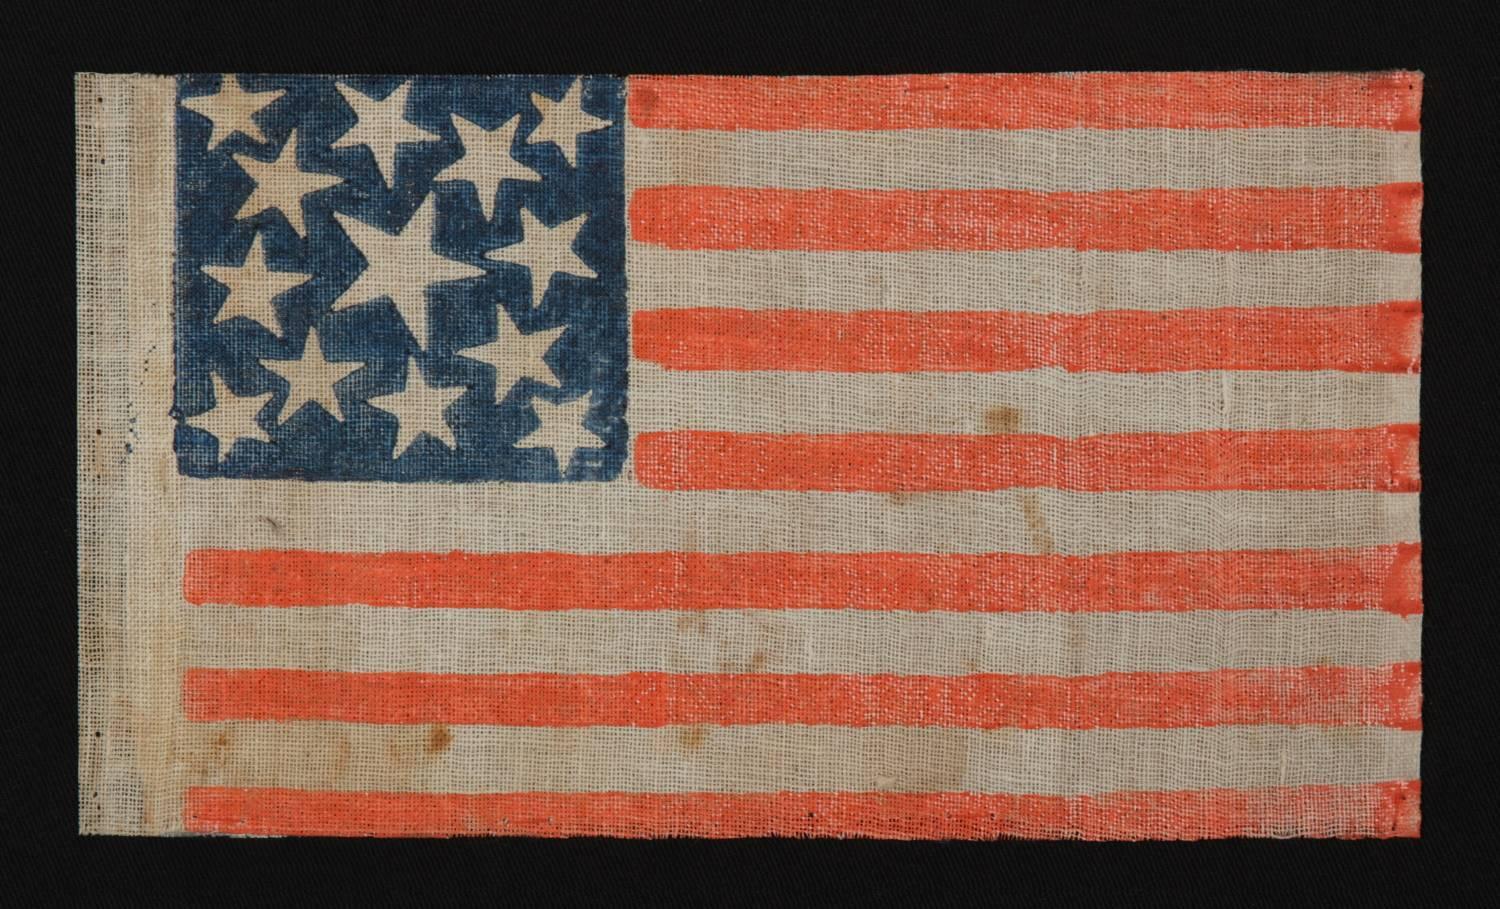 13 stars, 1861-1876 (civil war, centennial), featuring three sizes of stars in a medallion pattern:
 
13 star American national parade flag, printed on coarse, glazed cotton, with a wreath star design that incorporates three different sizes of